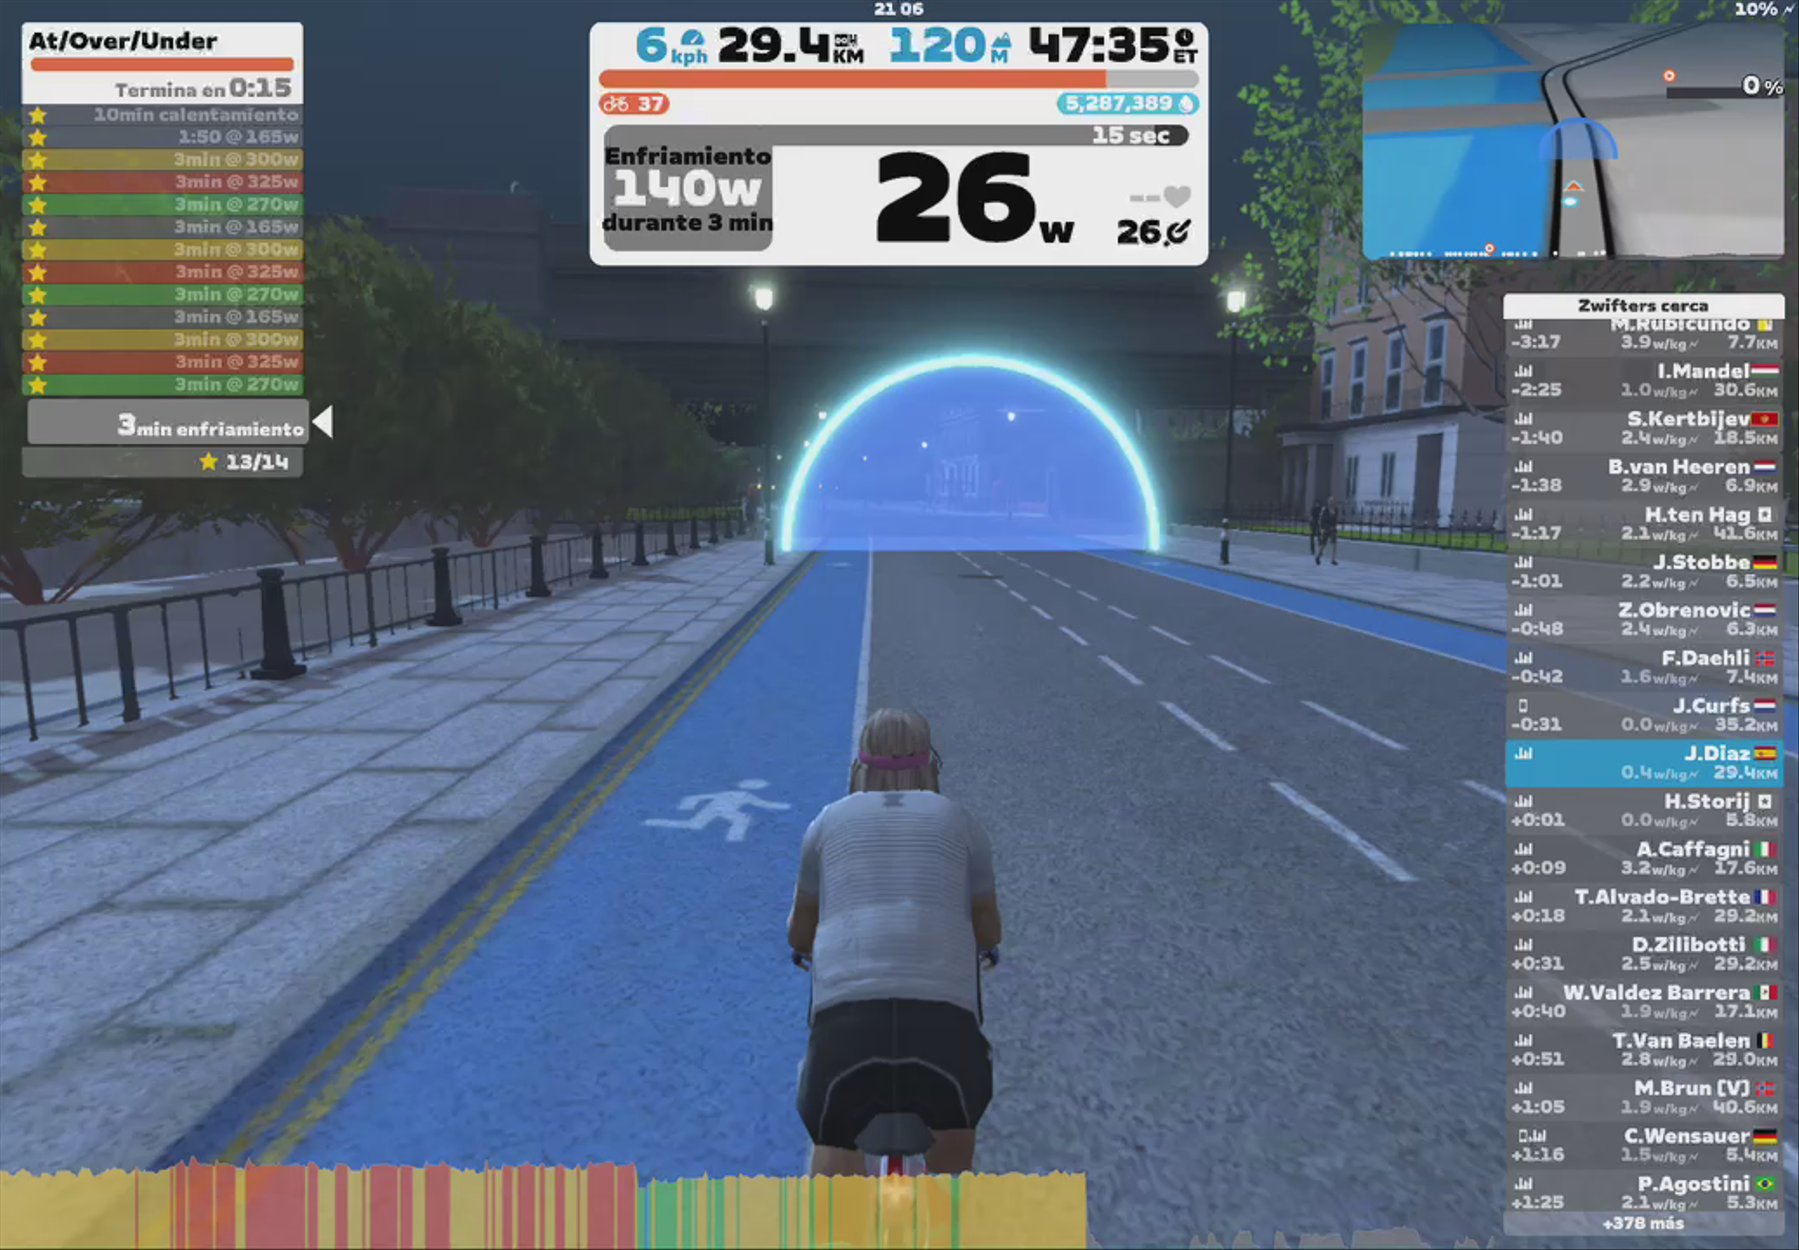 Zwift - At/Over/Under in London